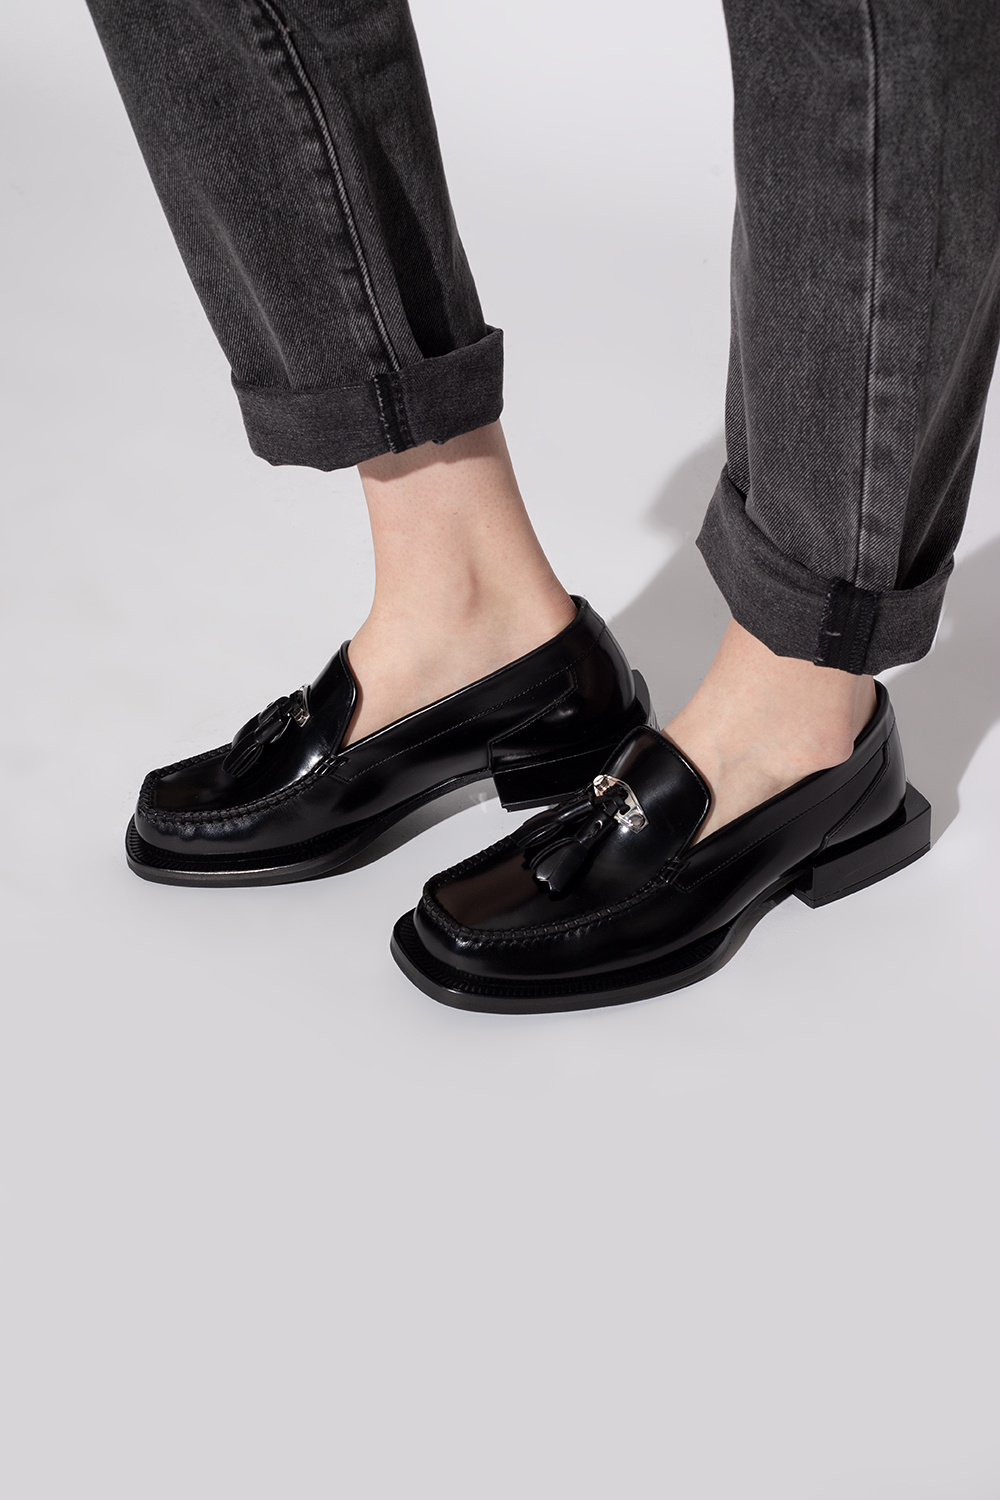 Eytys 'Rio' loafers | Women's Shoes | Vitkac